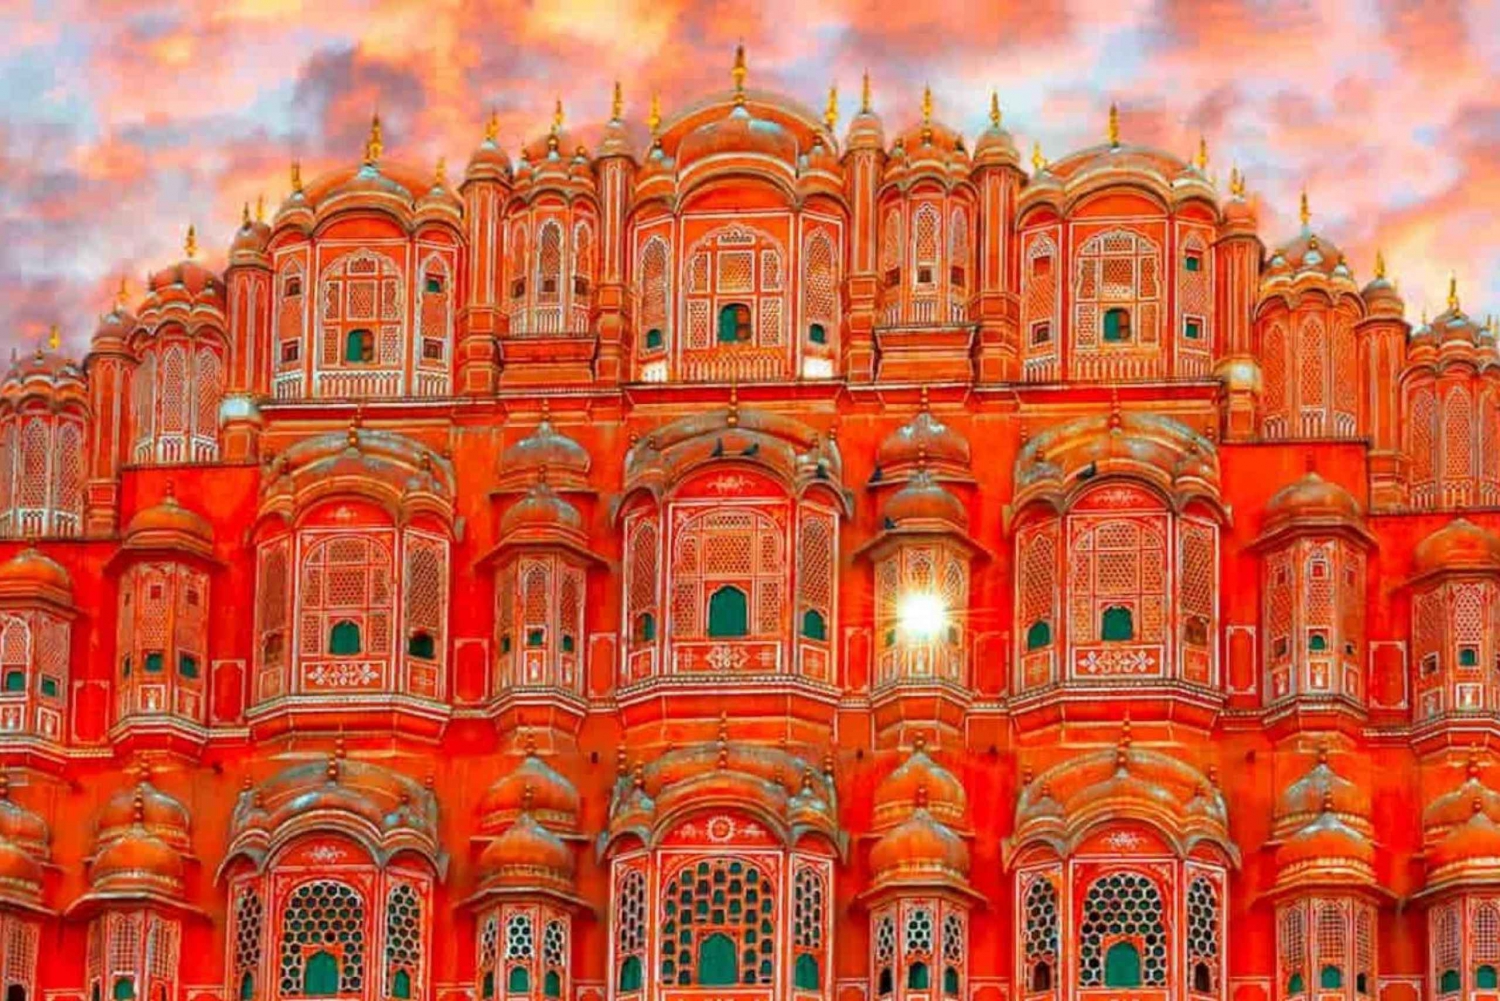 From New Delhi: Jaipur Guided City Tour with Hotel Pickup